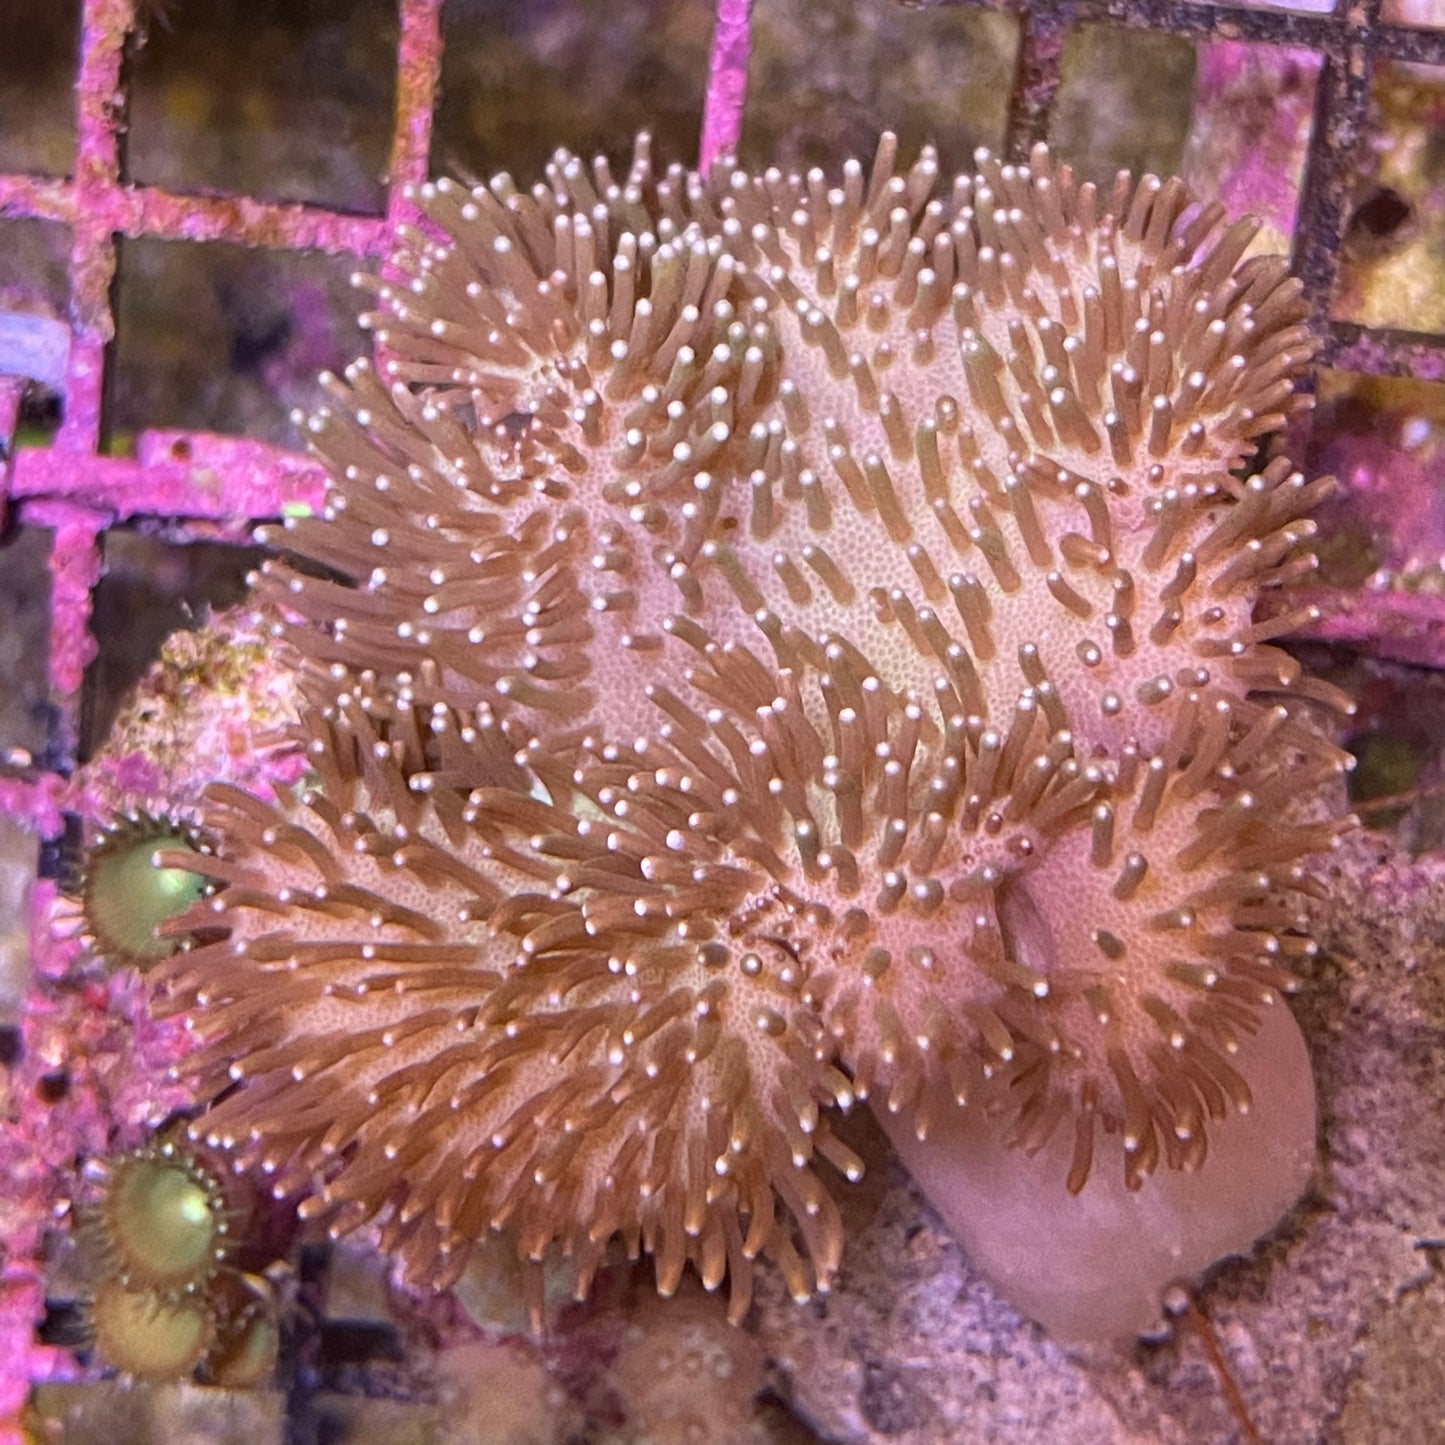 Soft Coral Colony Med